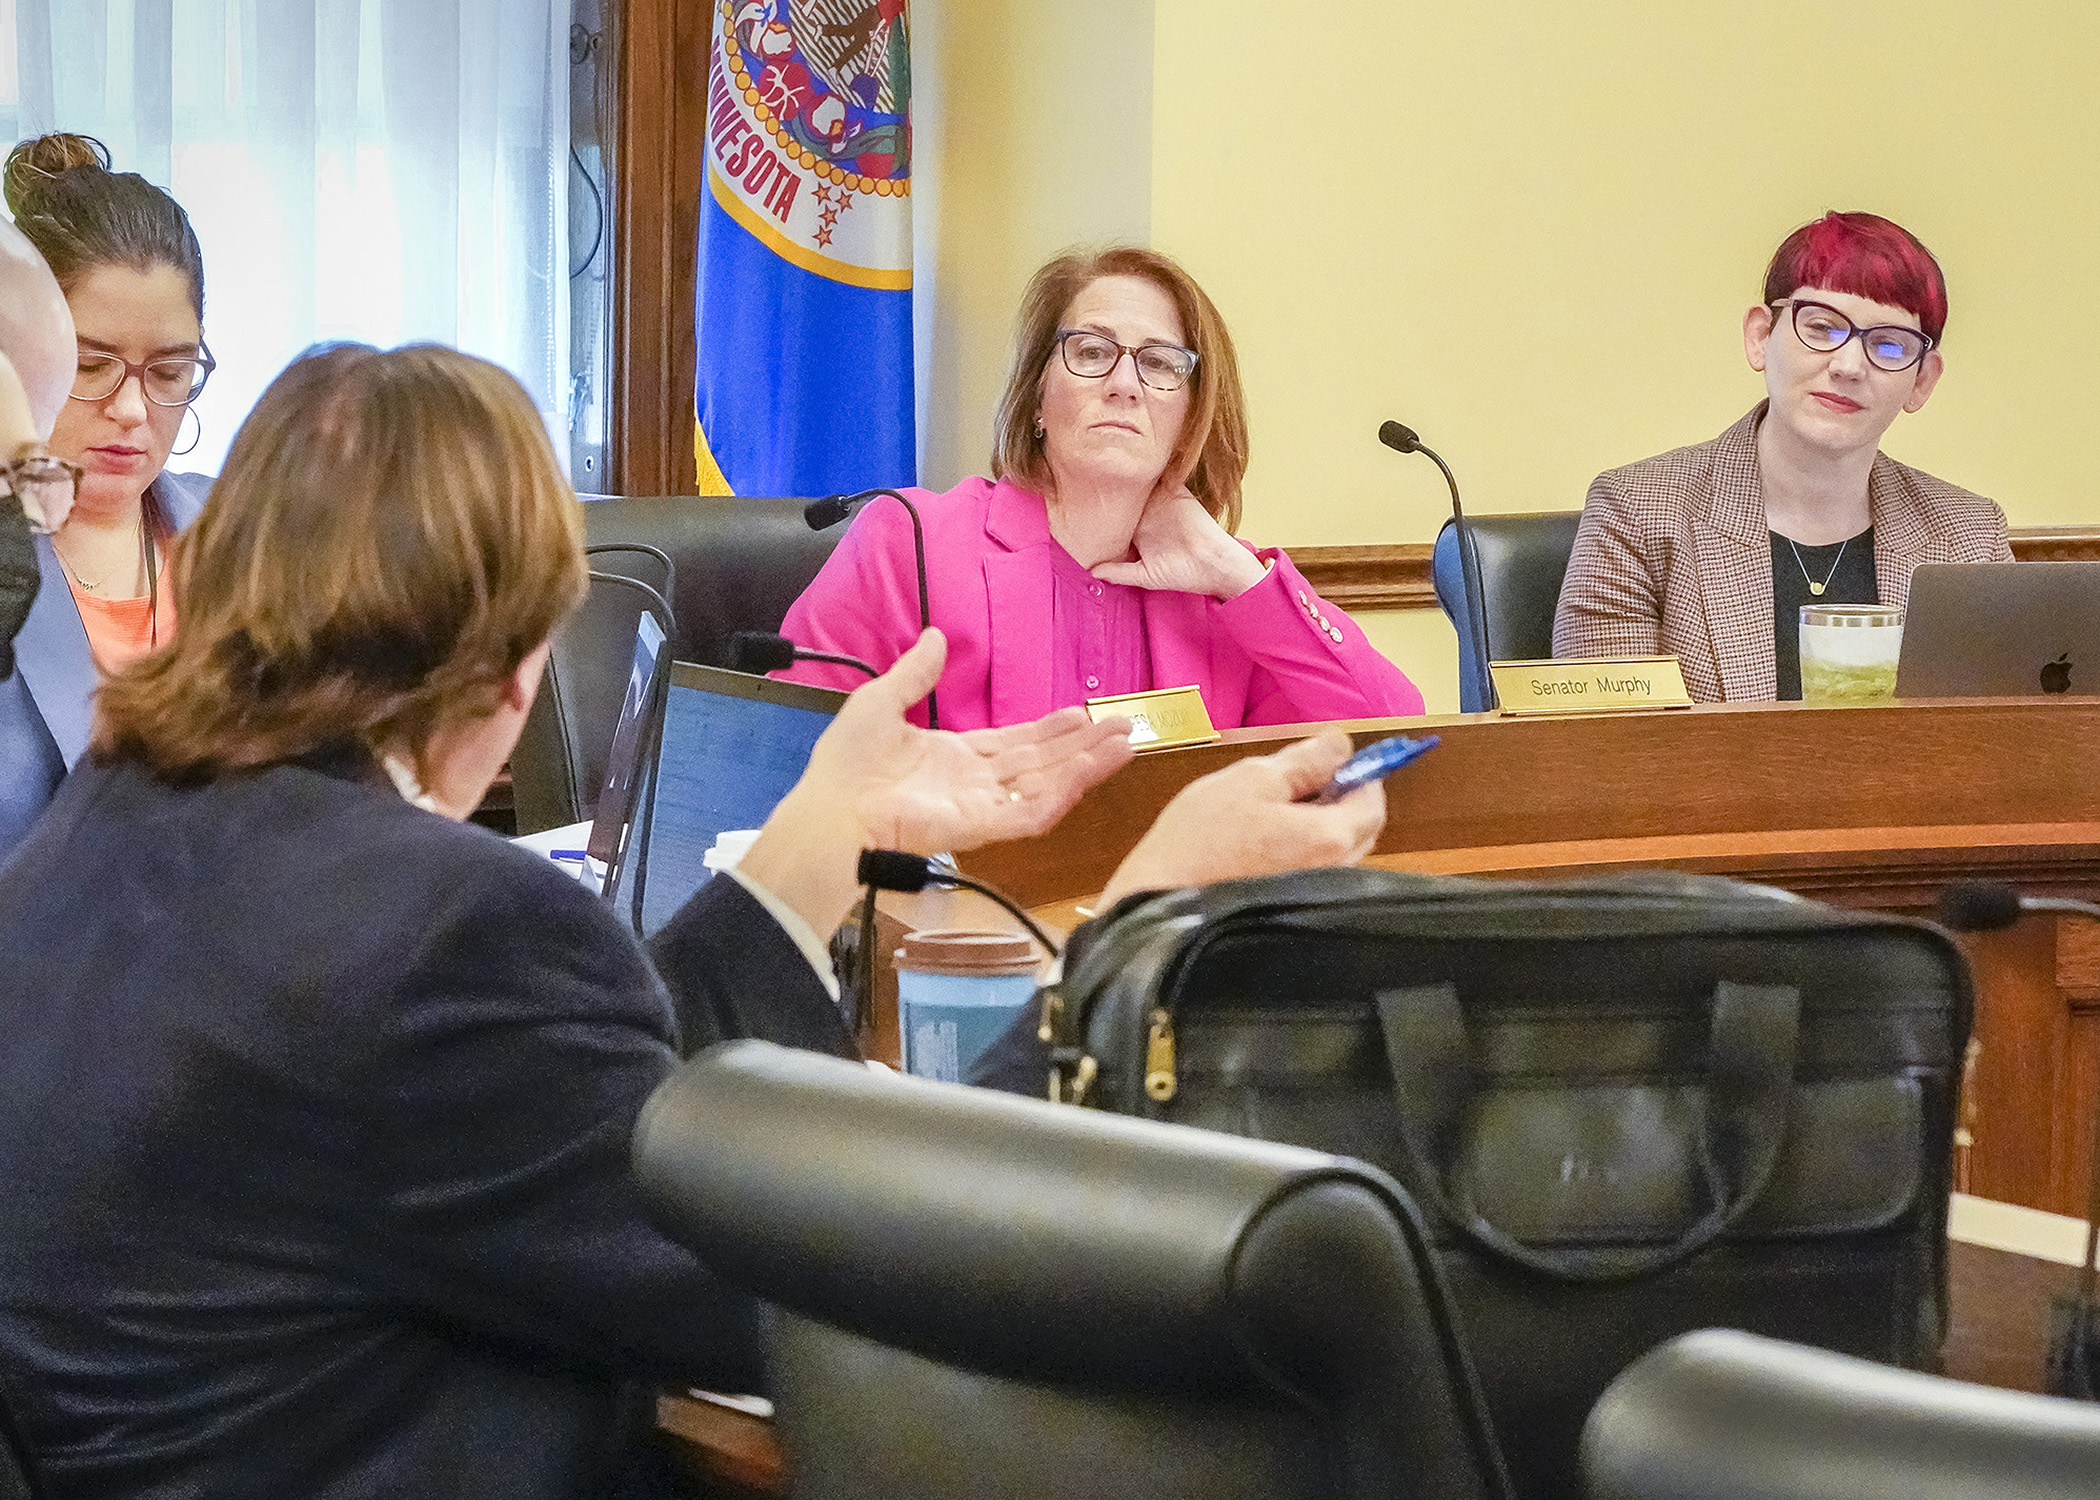 Sen. Erin Murphy and Rep. Sandra Feist listen to comments from conferees May 20 during the conference committee on SF1384 – the “Keeping Nurses at the Bedside Act.” (Photo by Andrew VonBank)